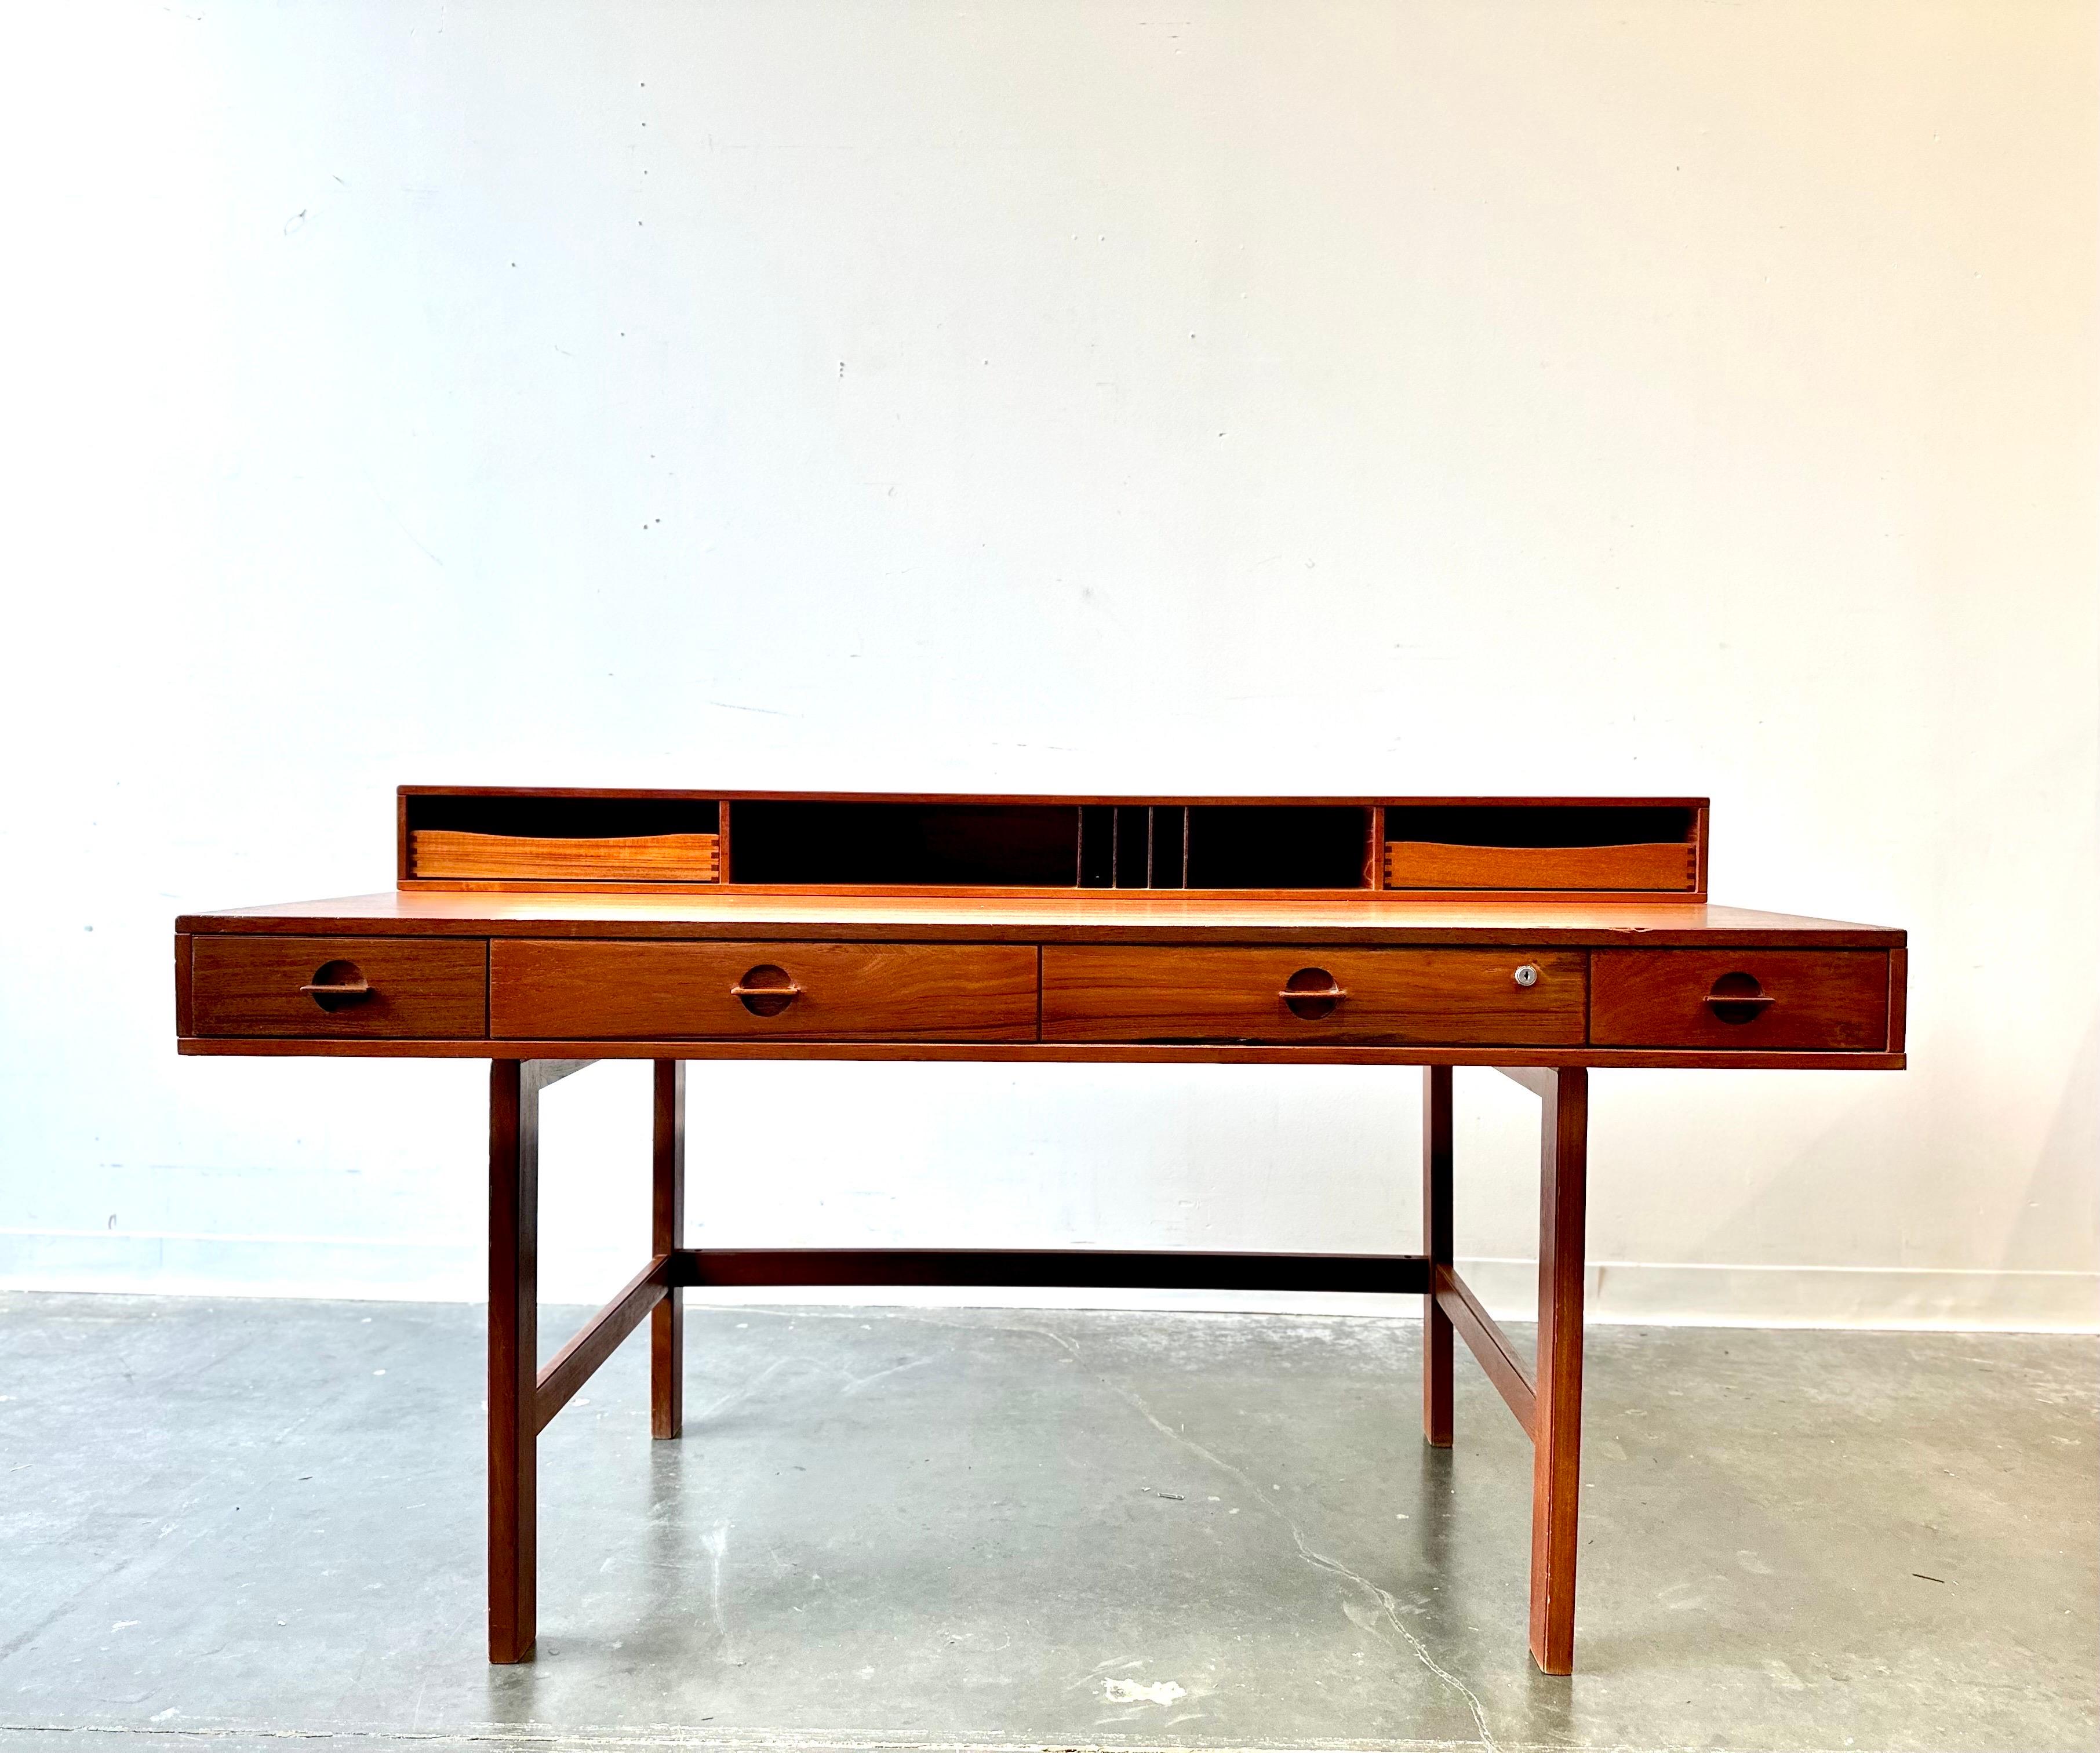 Peter Lovig Nielsen flip top desk.

Gorgeous teak desk that’s been freshly restored.
This has fantastic grain and a ton of desk top space and storage.

